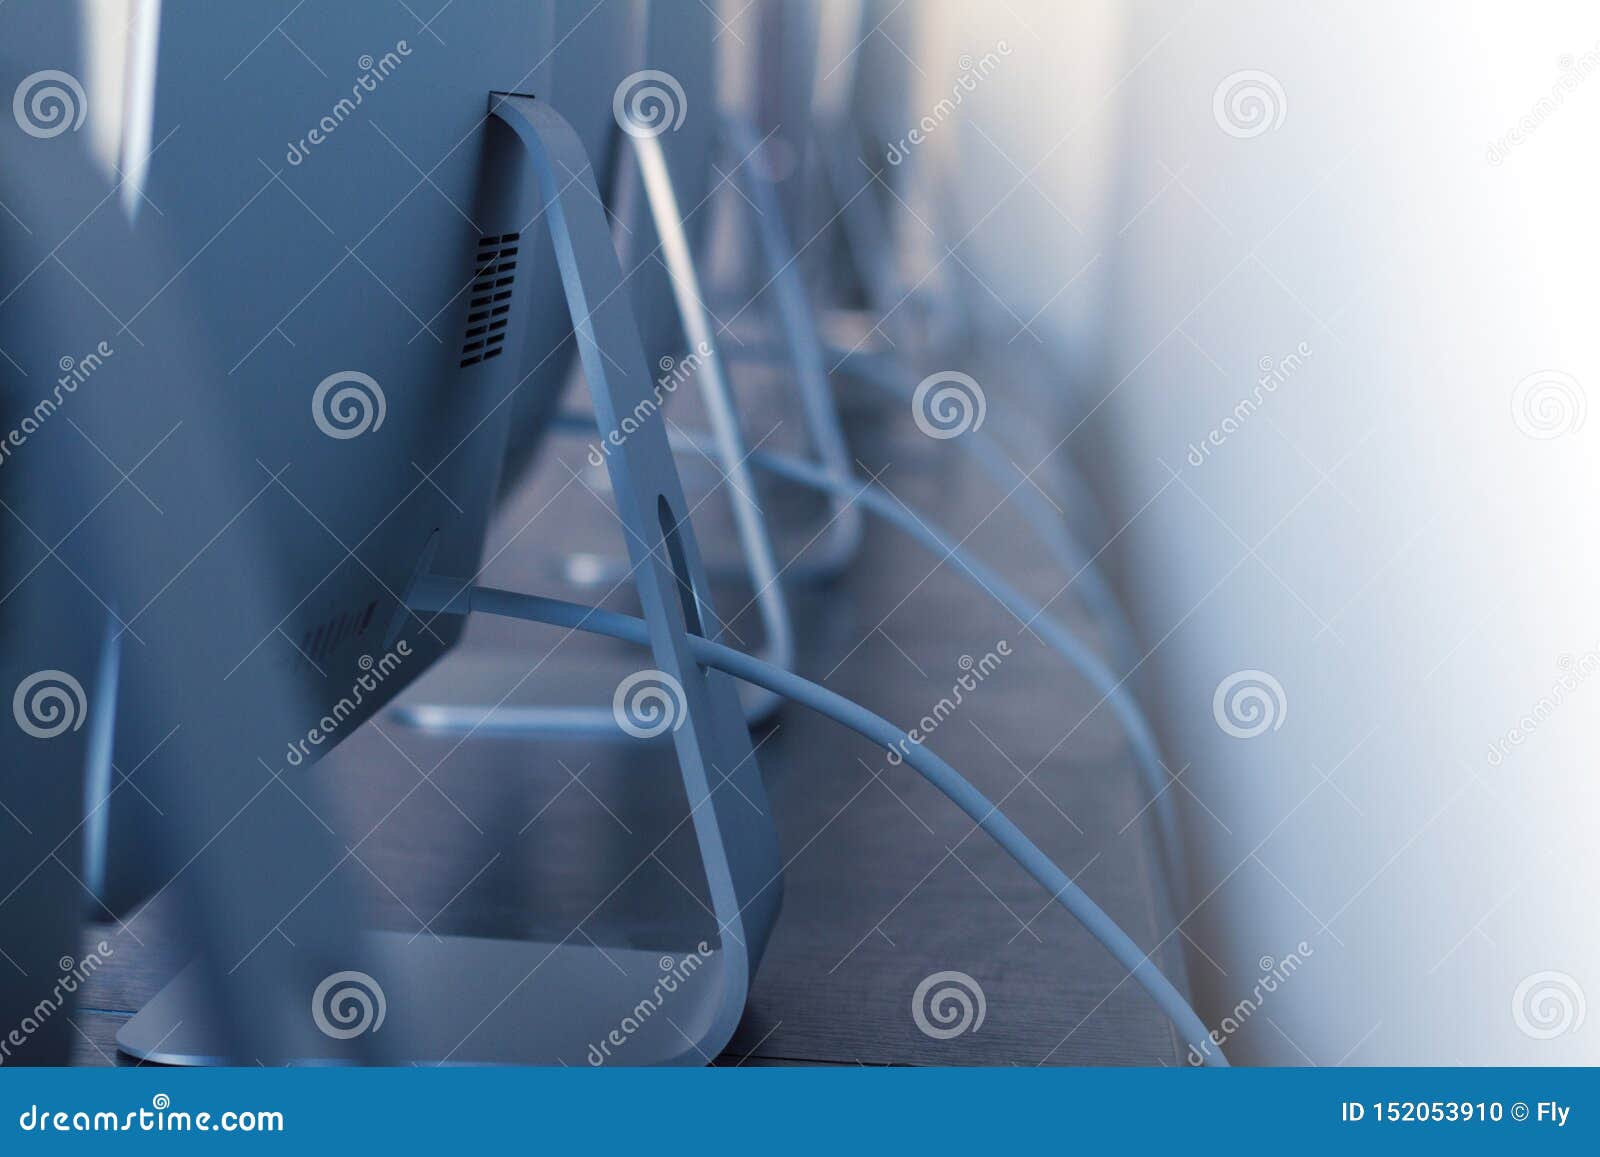 Row Of Desktop Computers With Cables On Desk Stock Photo Image